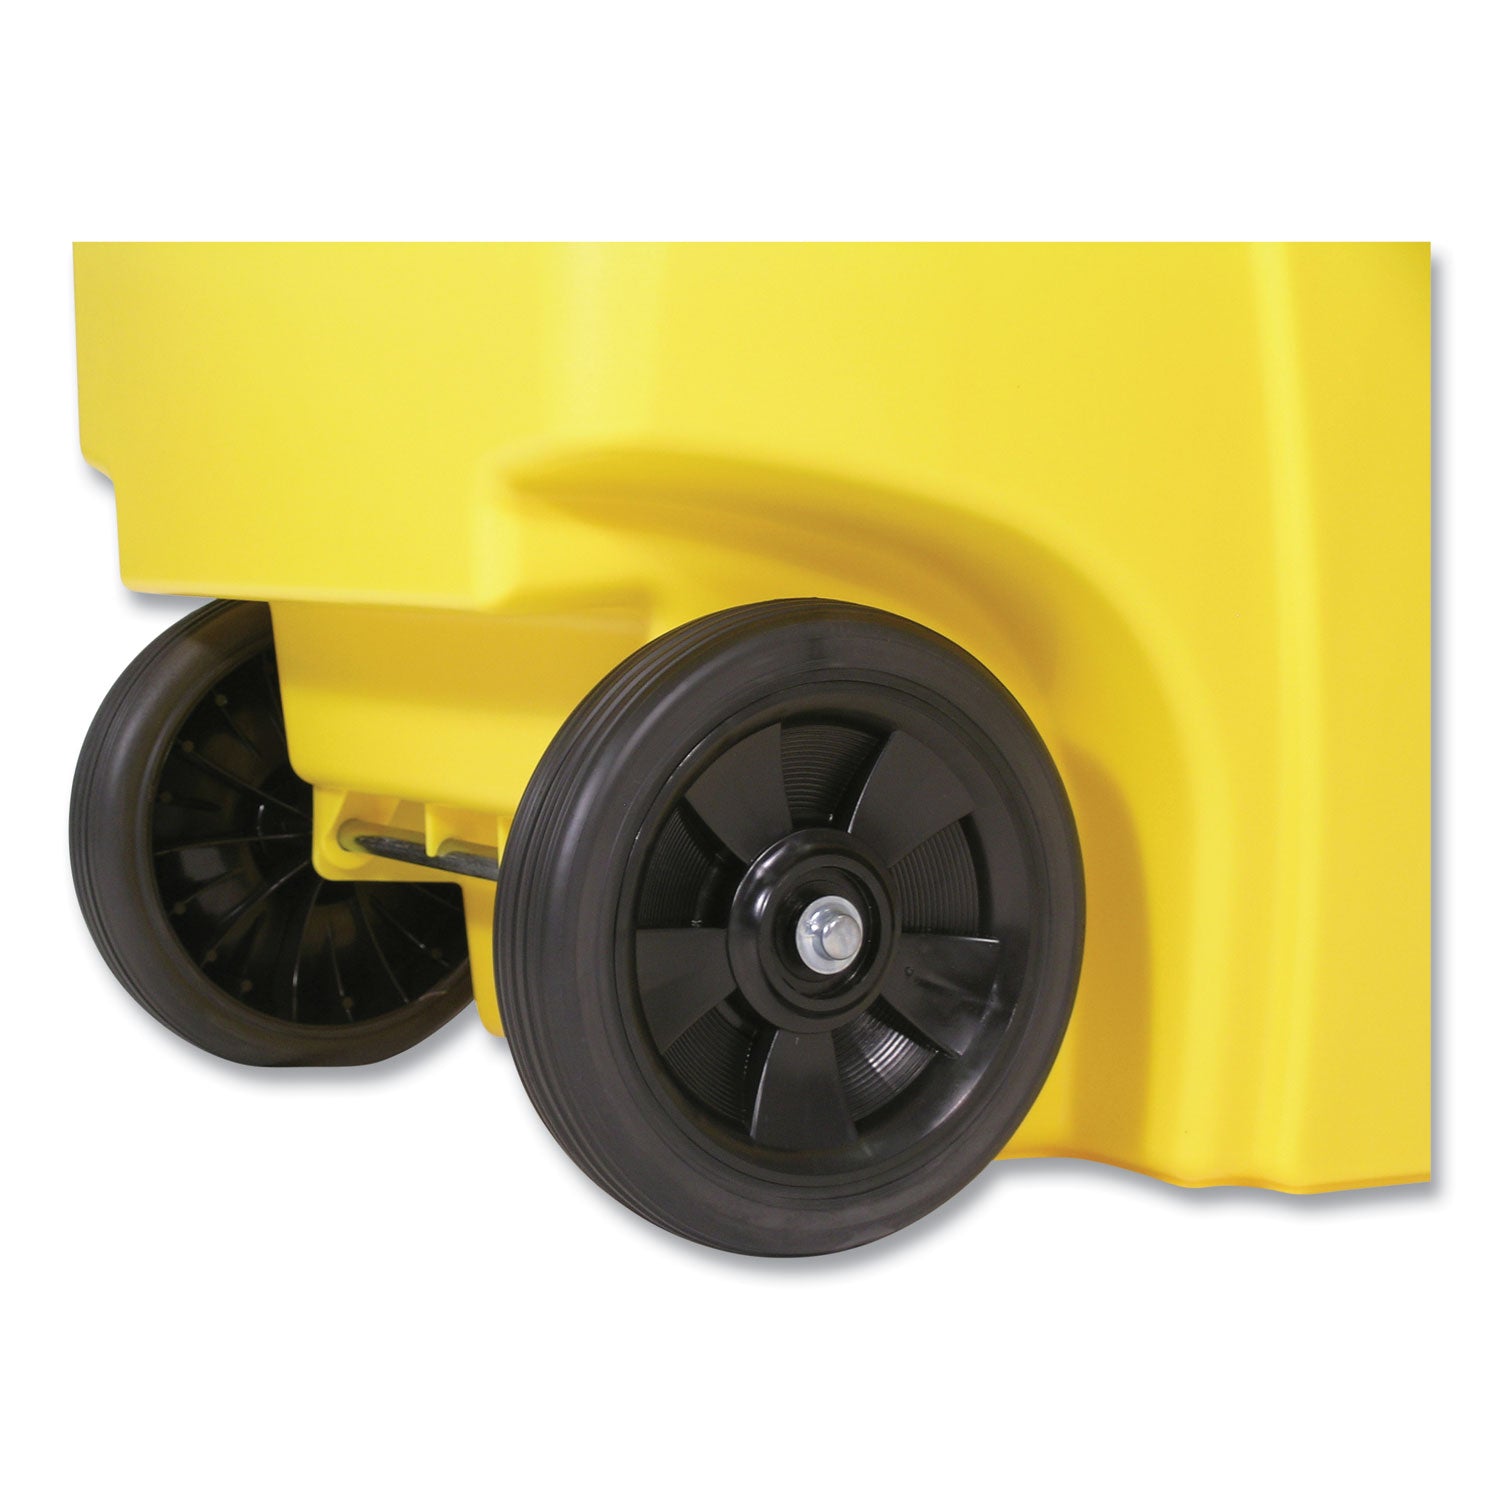 Square Brute Rollout Container, 50 gal, Molded Plastic, Yellow - 